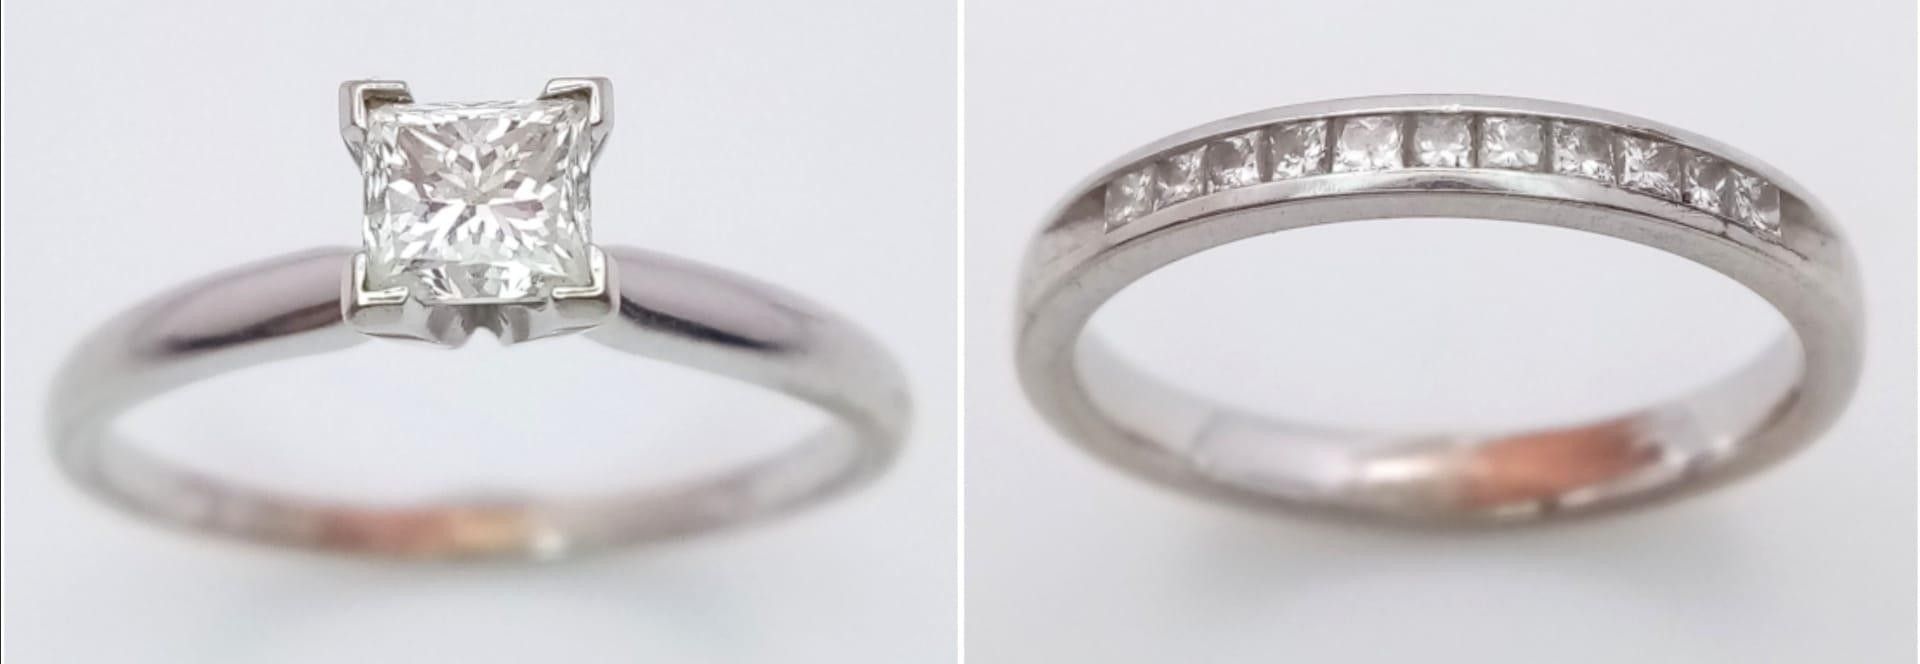 Two Different Style 14K White Gold Diamond Rings - Diamond solitaire - size N - 0.50ct princess cut. - Image 2 of 4